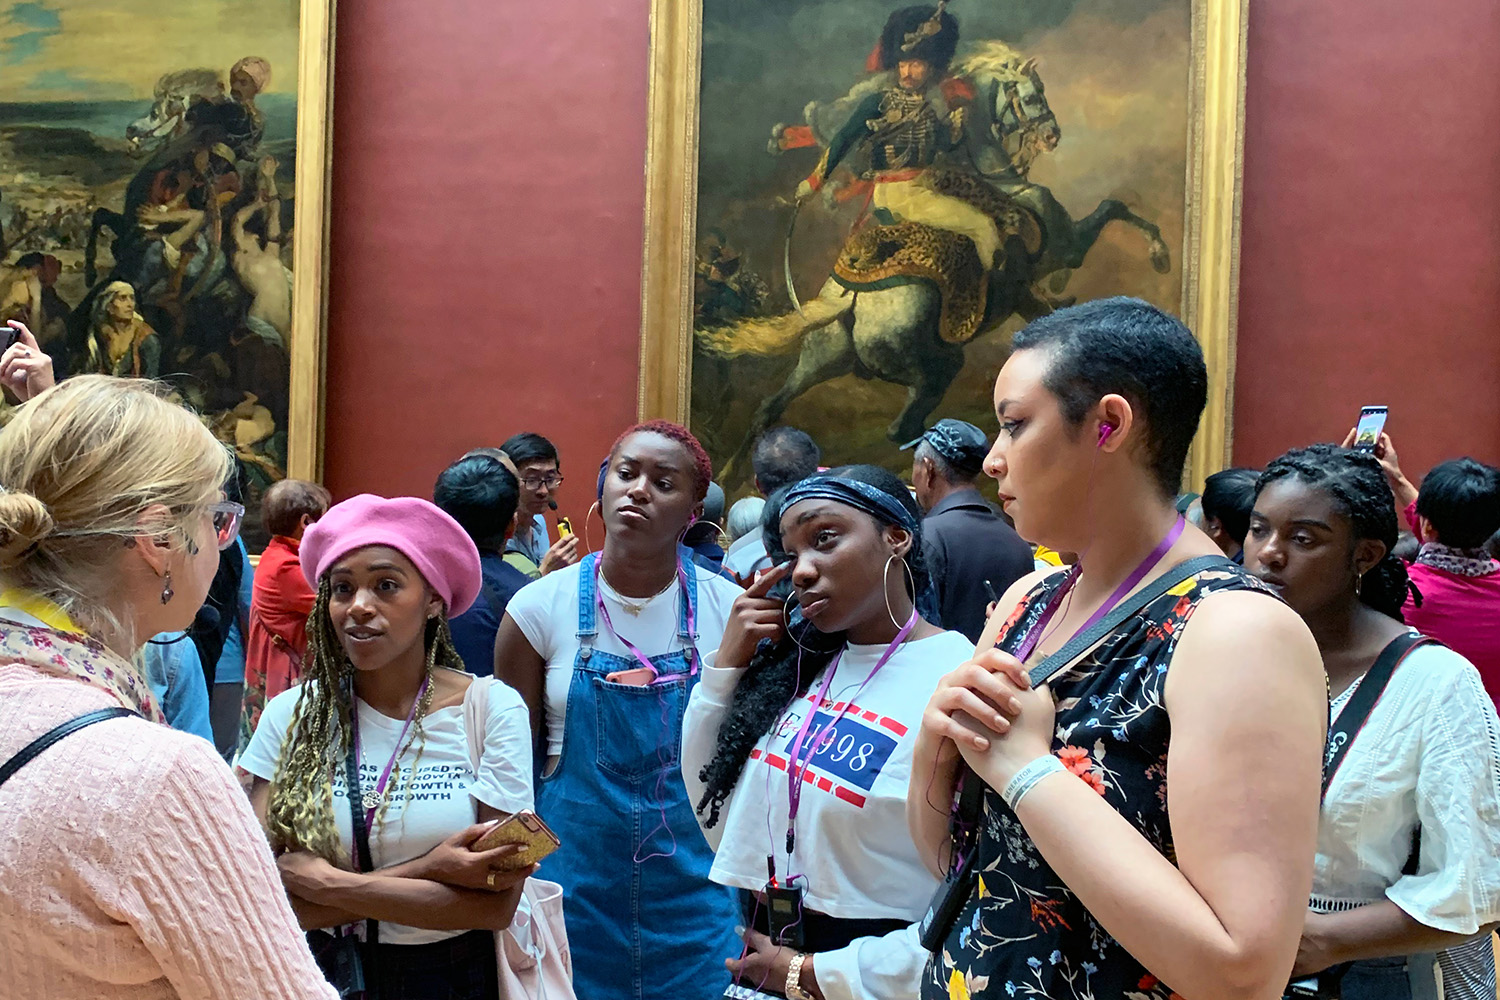 WGSS students tour the Louvre in Paris